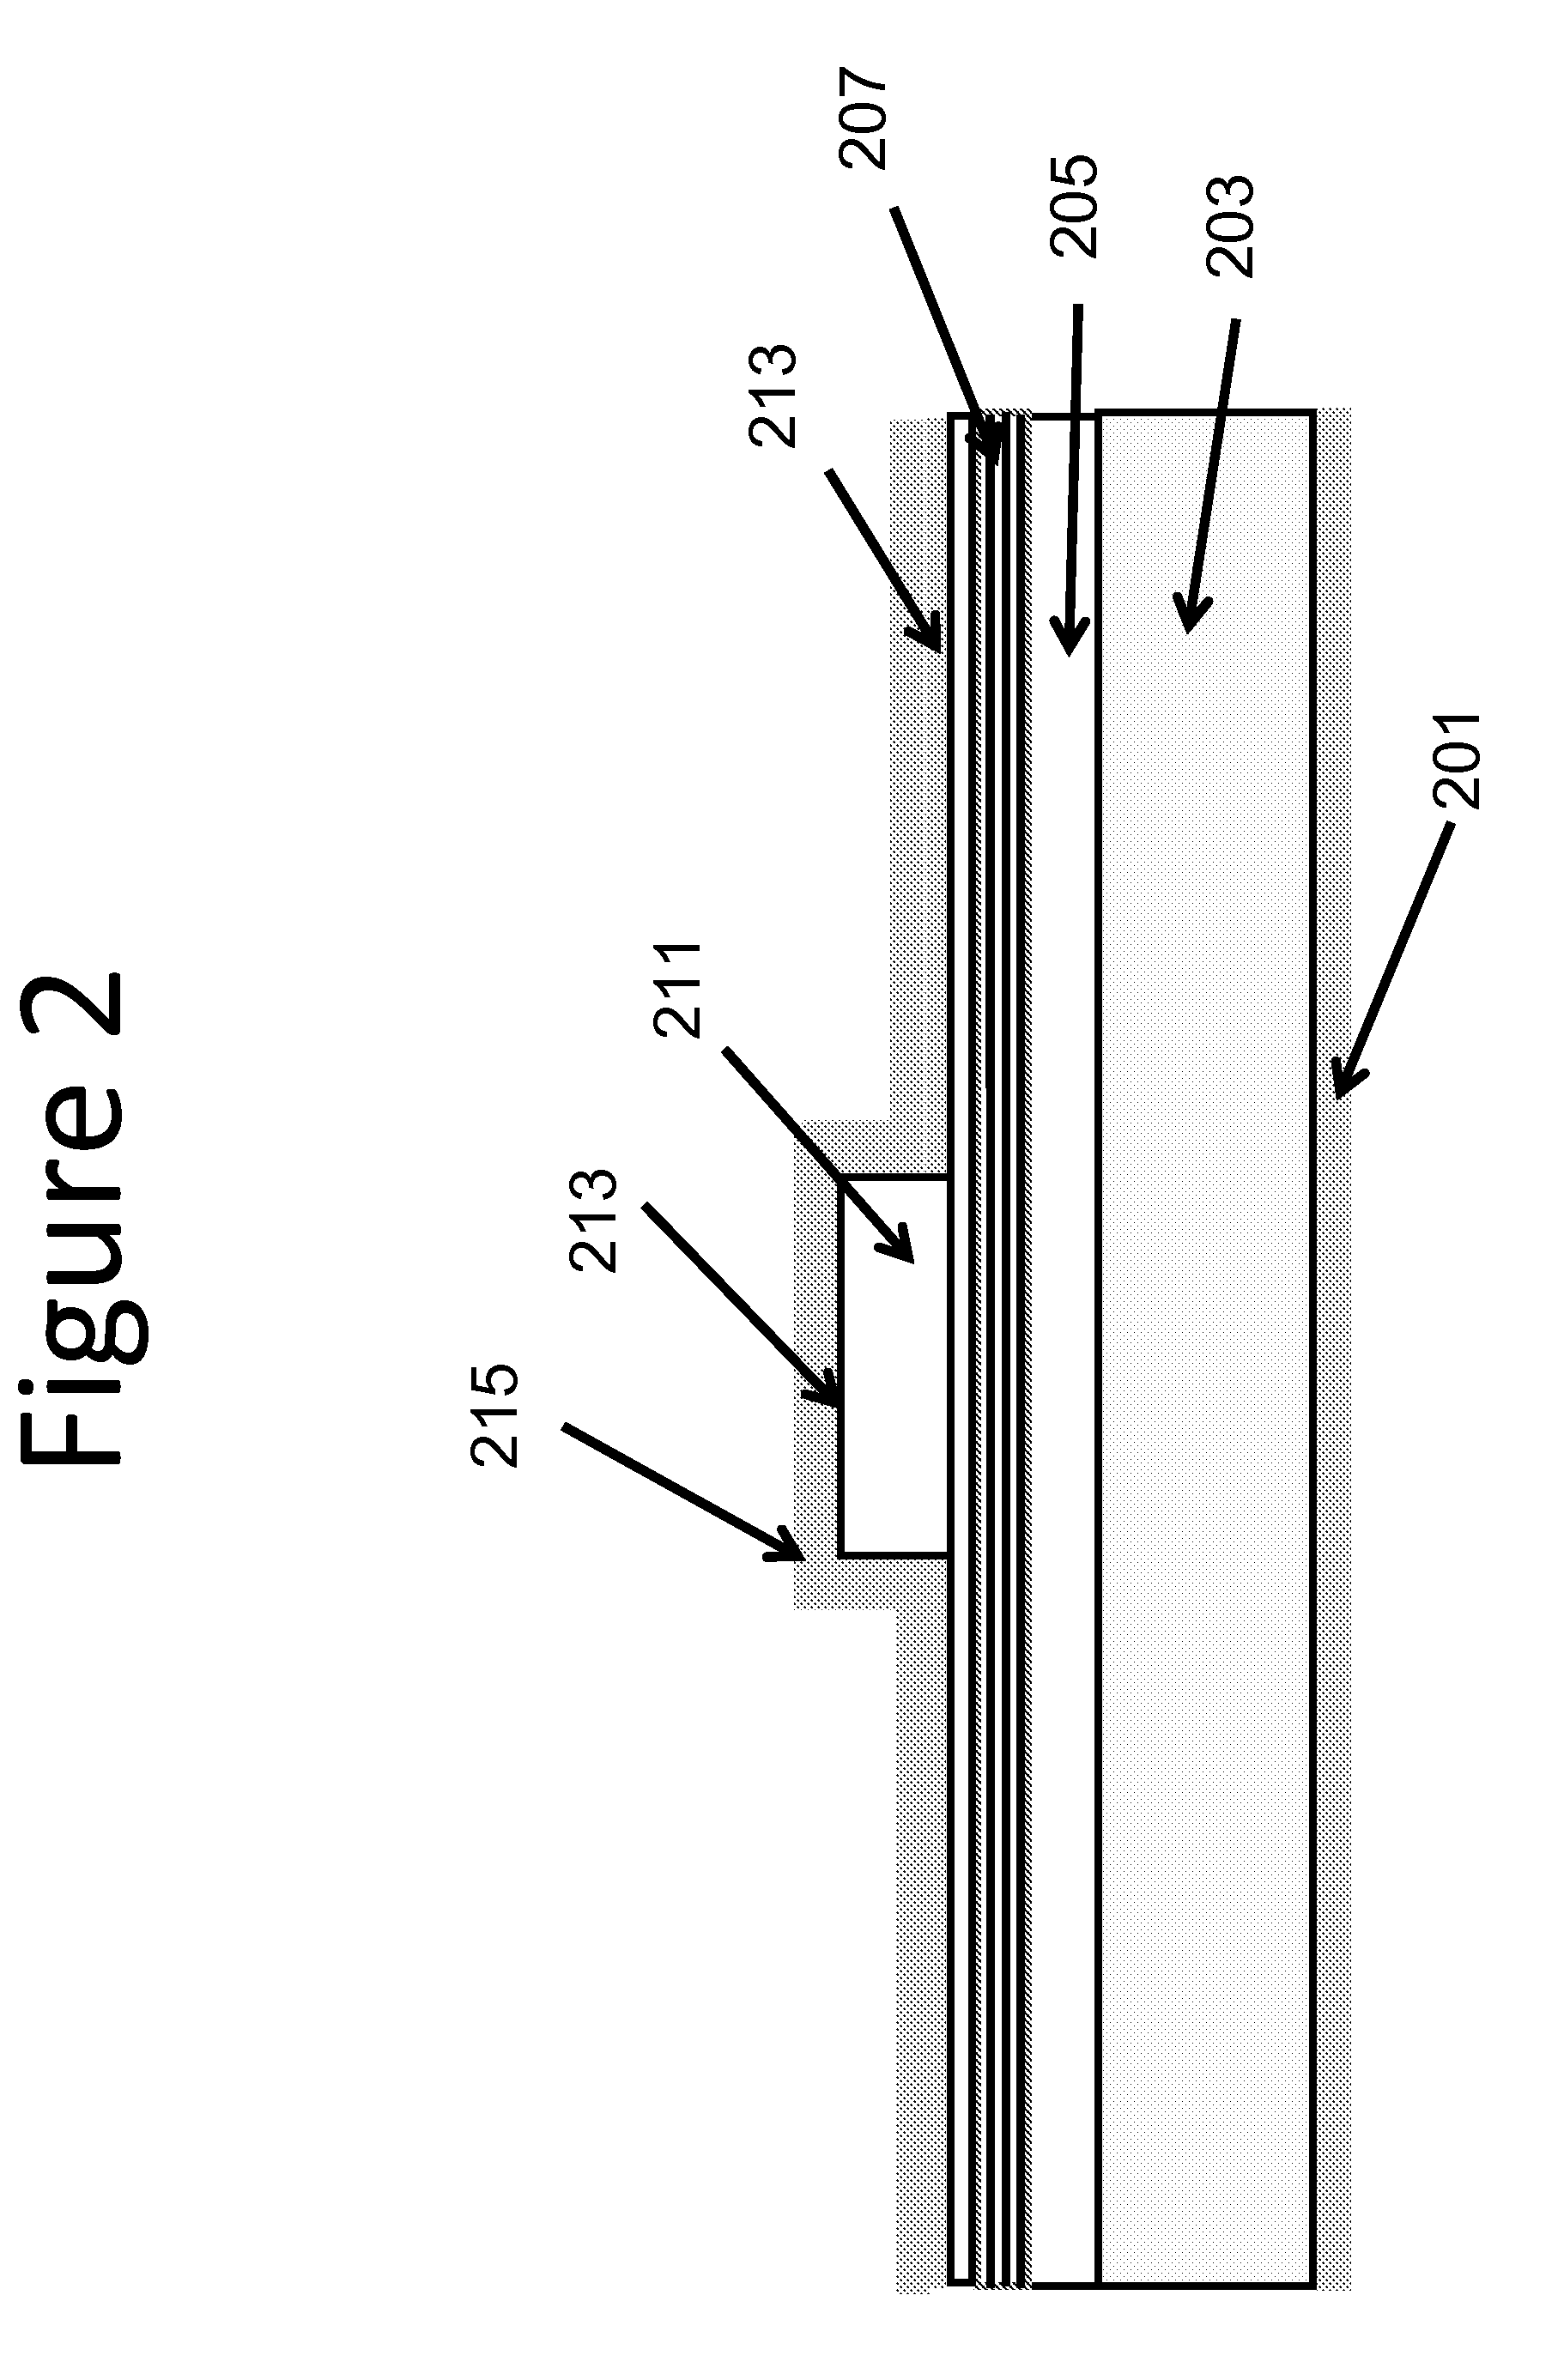 Growth structures and method for forming laser diodes on {30-31} or off cut gallium and nitrogen containing substrates